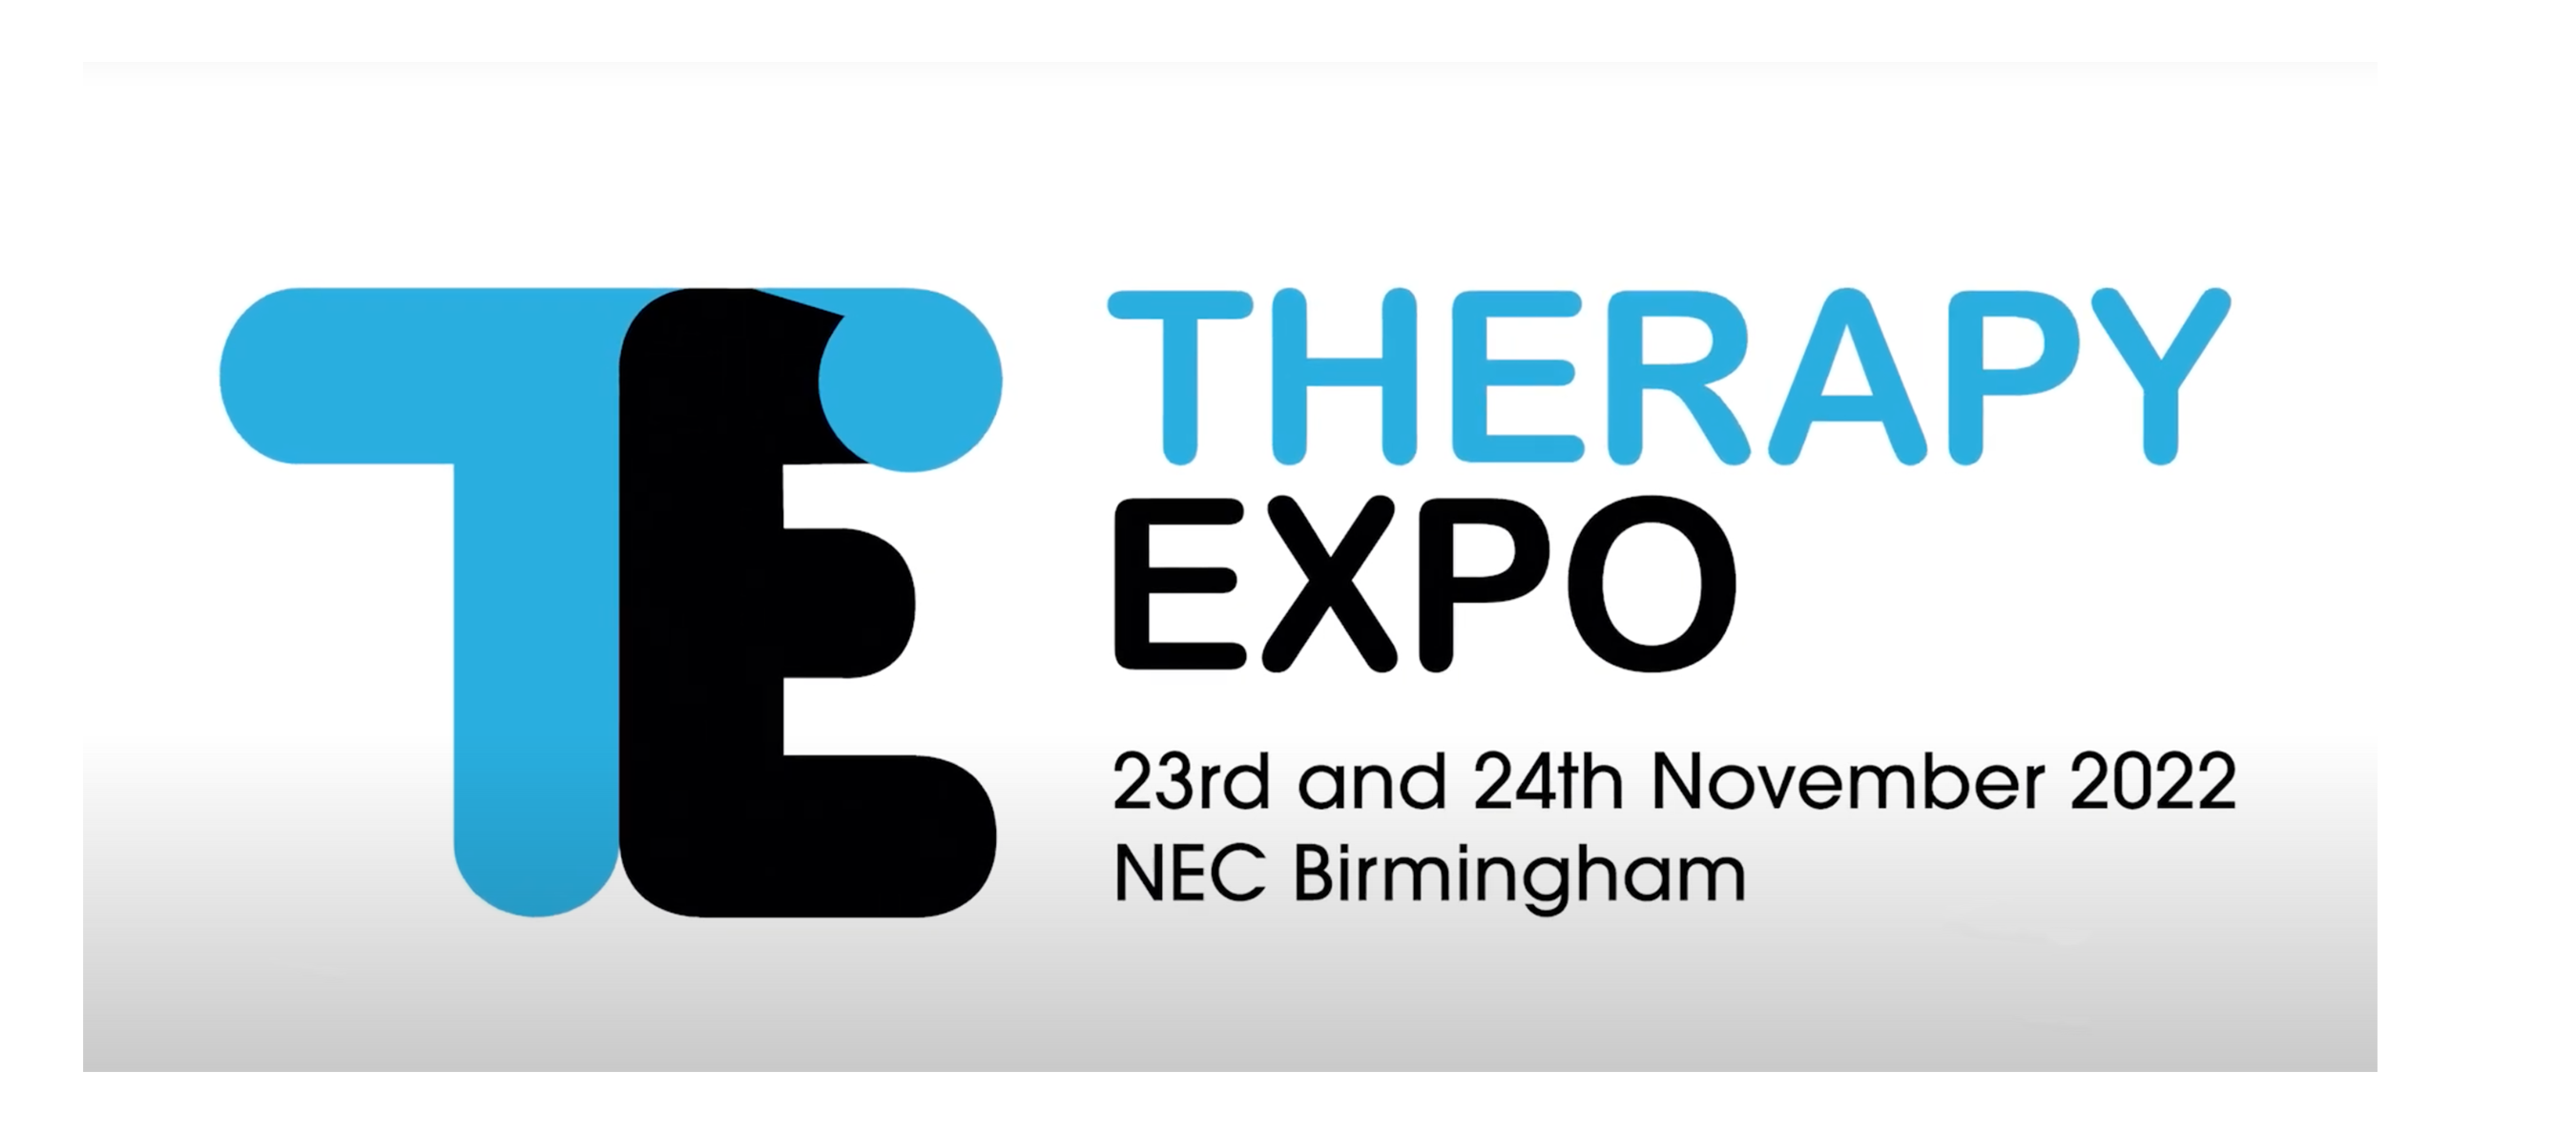 Therapy Expo 2022 